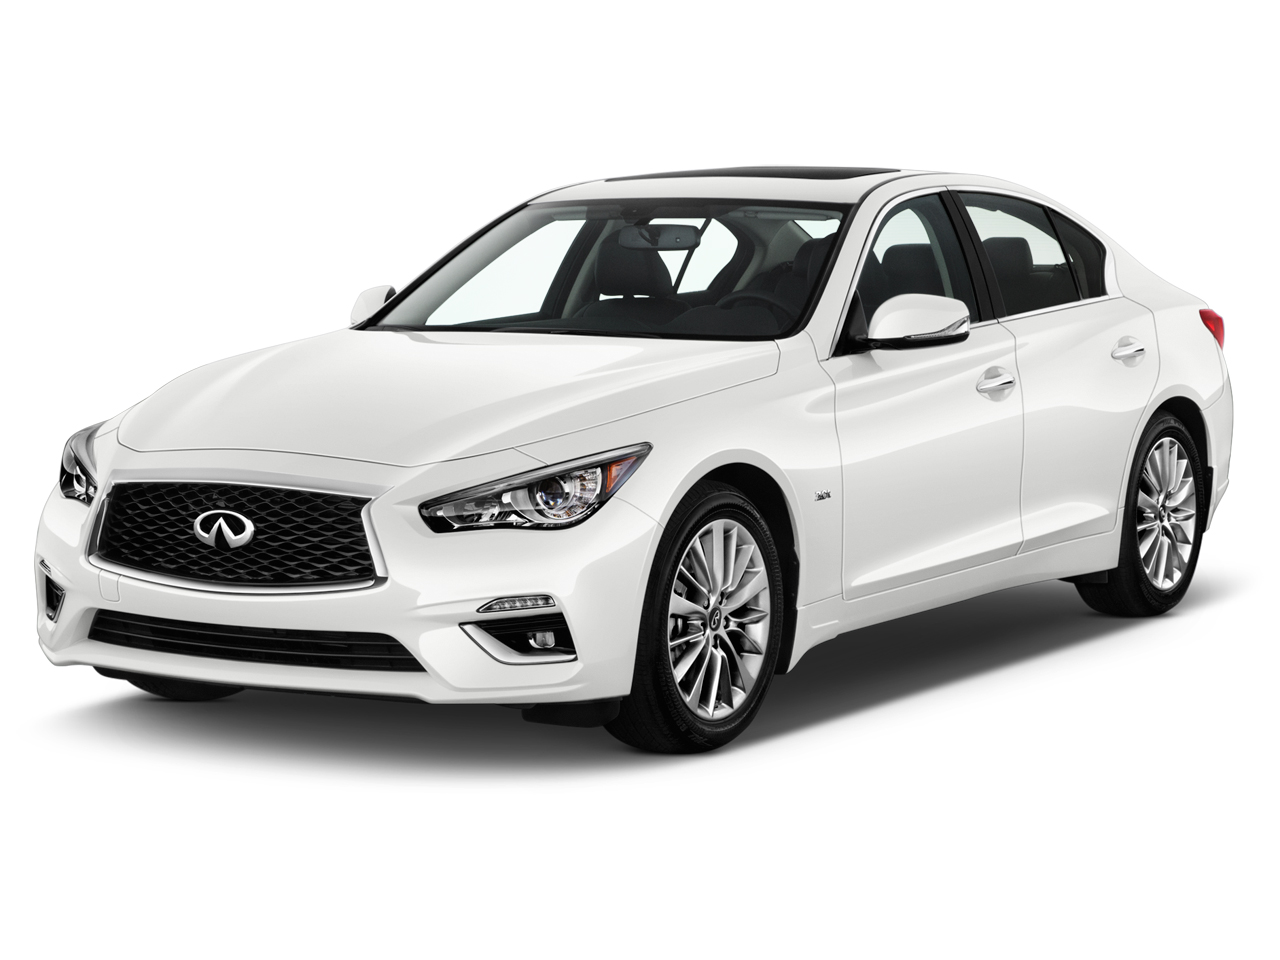 2021 INFINITI Q50 Review, Ratings, Specs, Prices, and Photos - The Car Connection